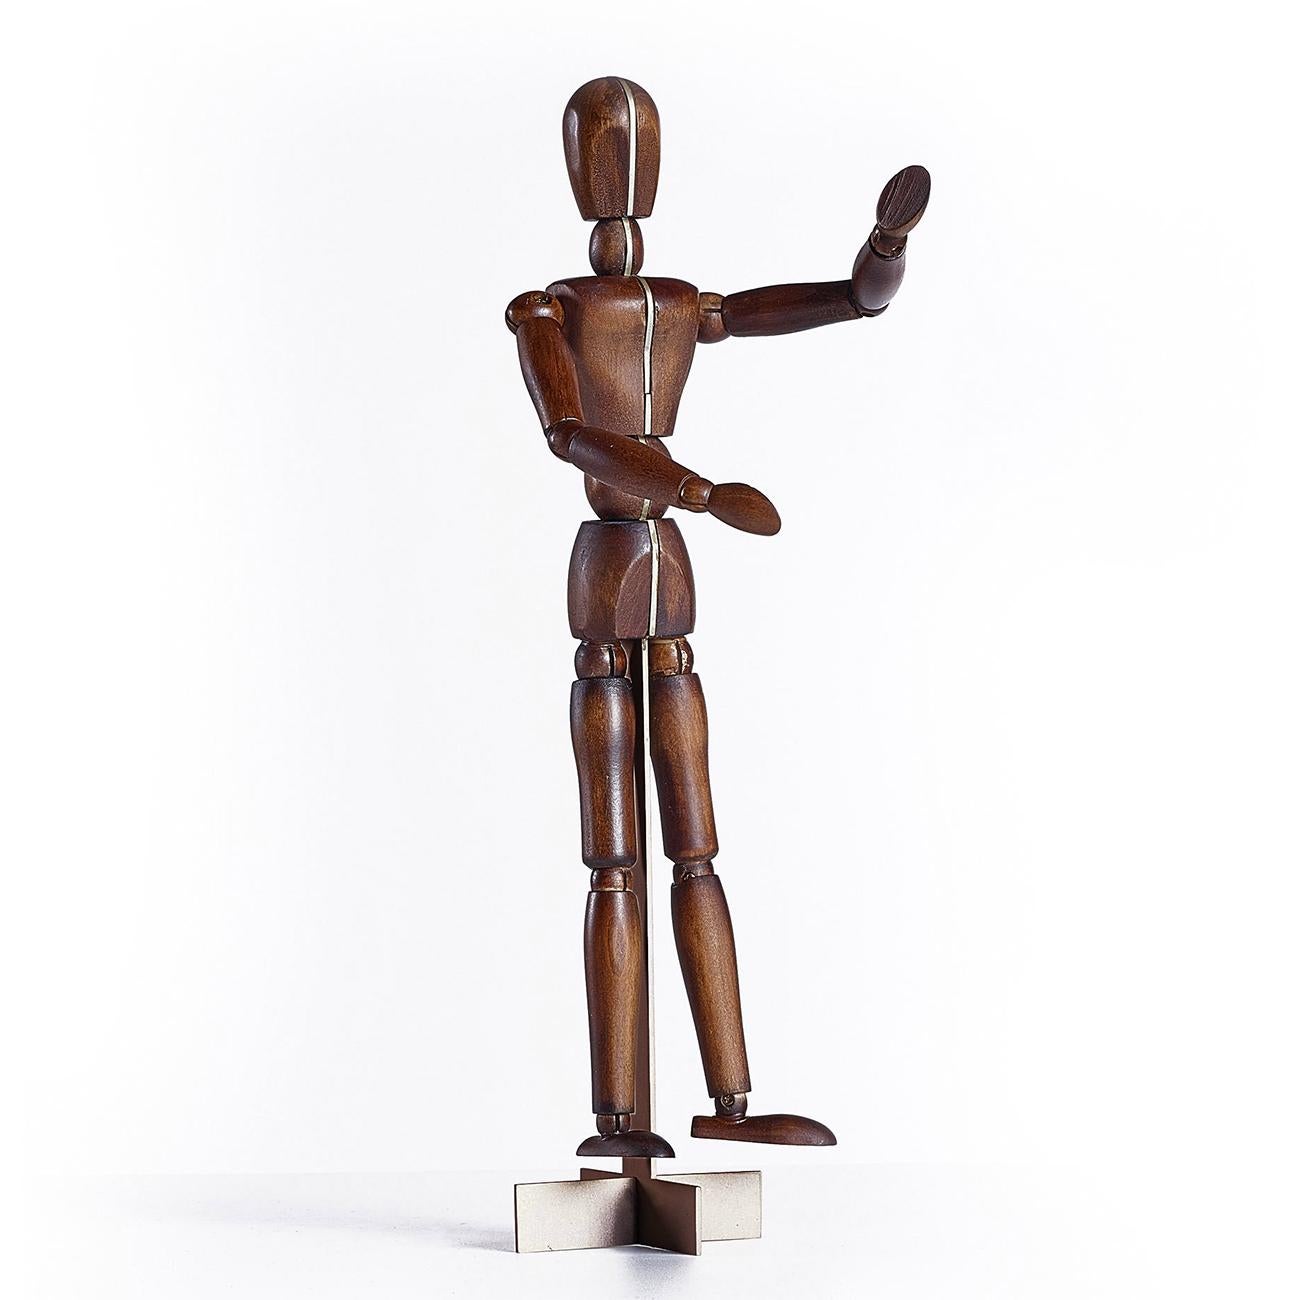 Sculpture wooden man with sold ash wood in
walnut stained finish and with structure in solid 
brass in matte finish.